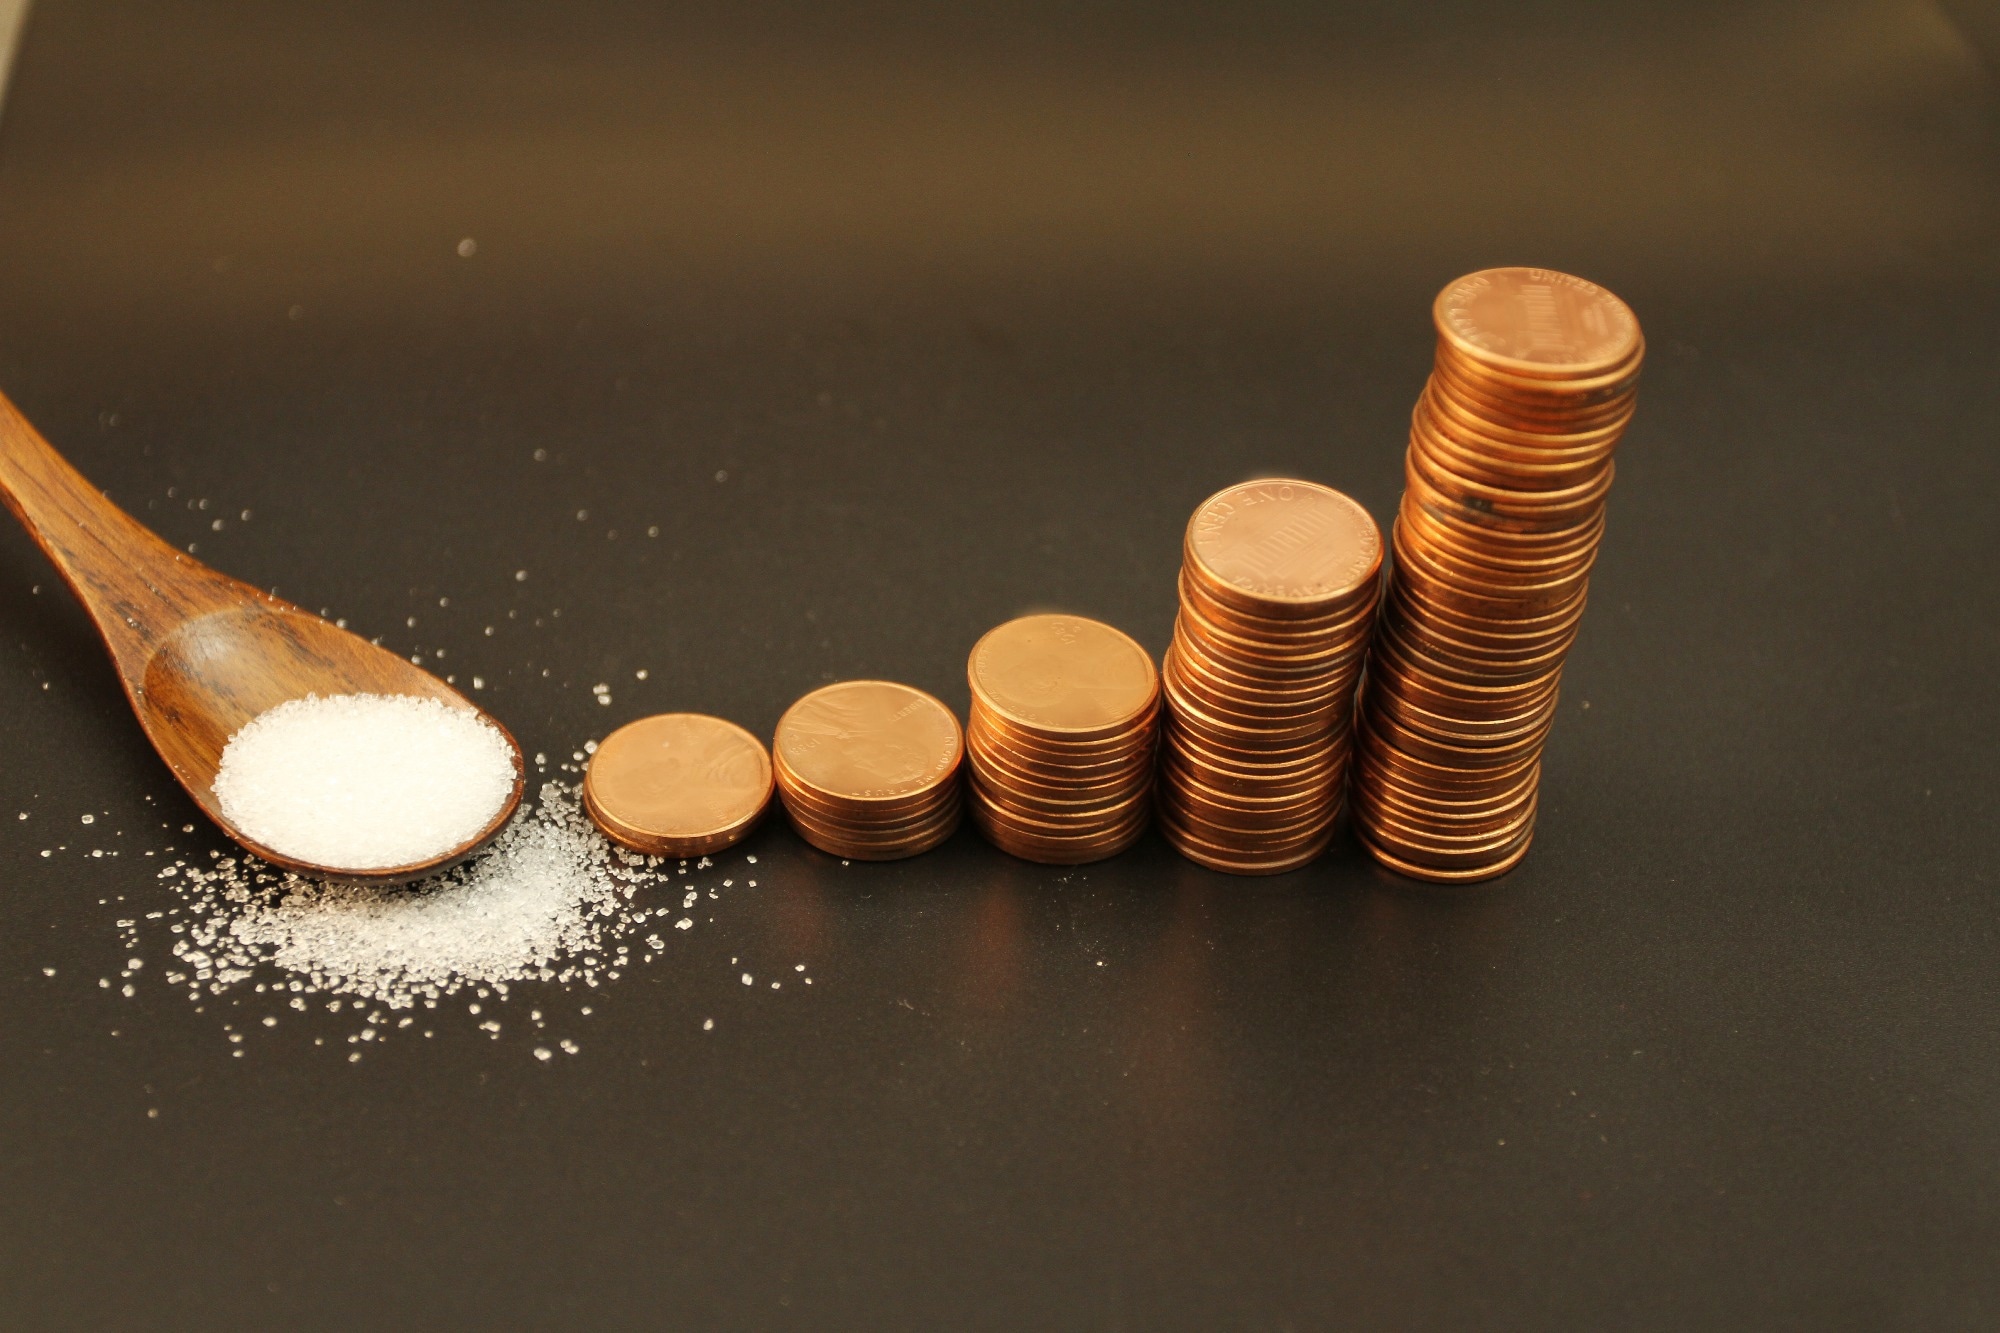 Study: Projected health and economic impacts of sugar-sweetened beverage taxation in Germany: A cross-validation modelling study. Image Credit: TassaneeT / Shutterstock